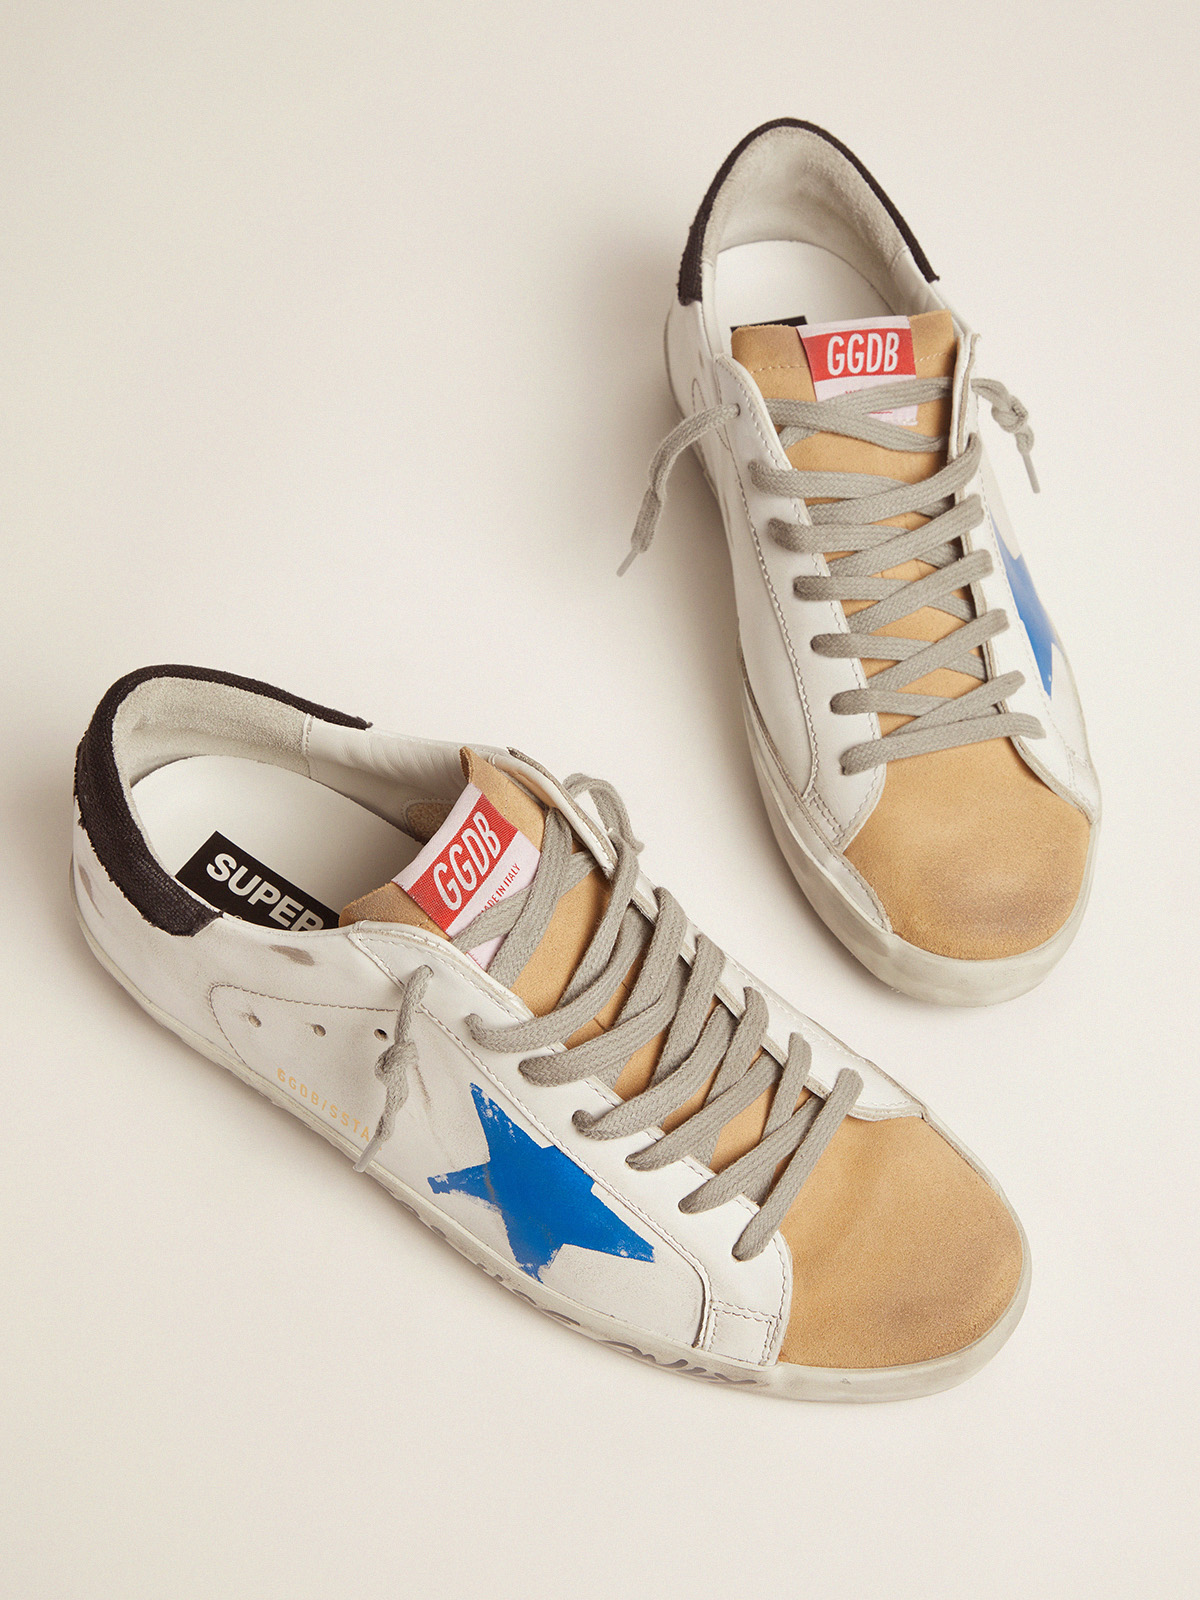 ShopStyle Look by lsassociate featuring Golden Goose Multicolor Superstar  Sneakers and Original P…